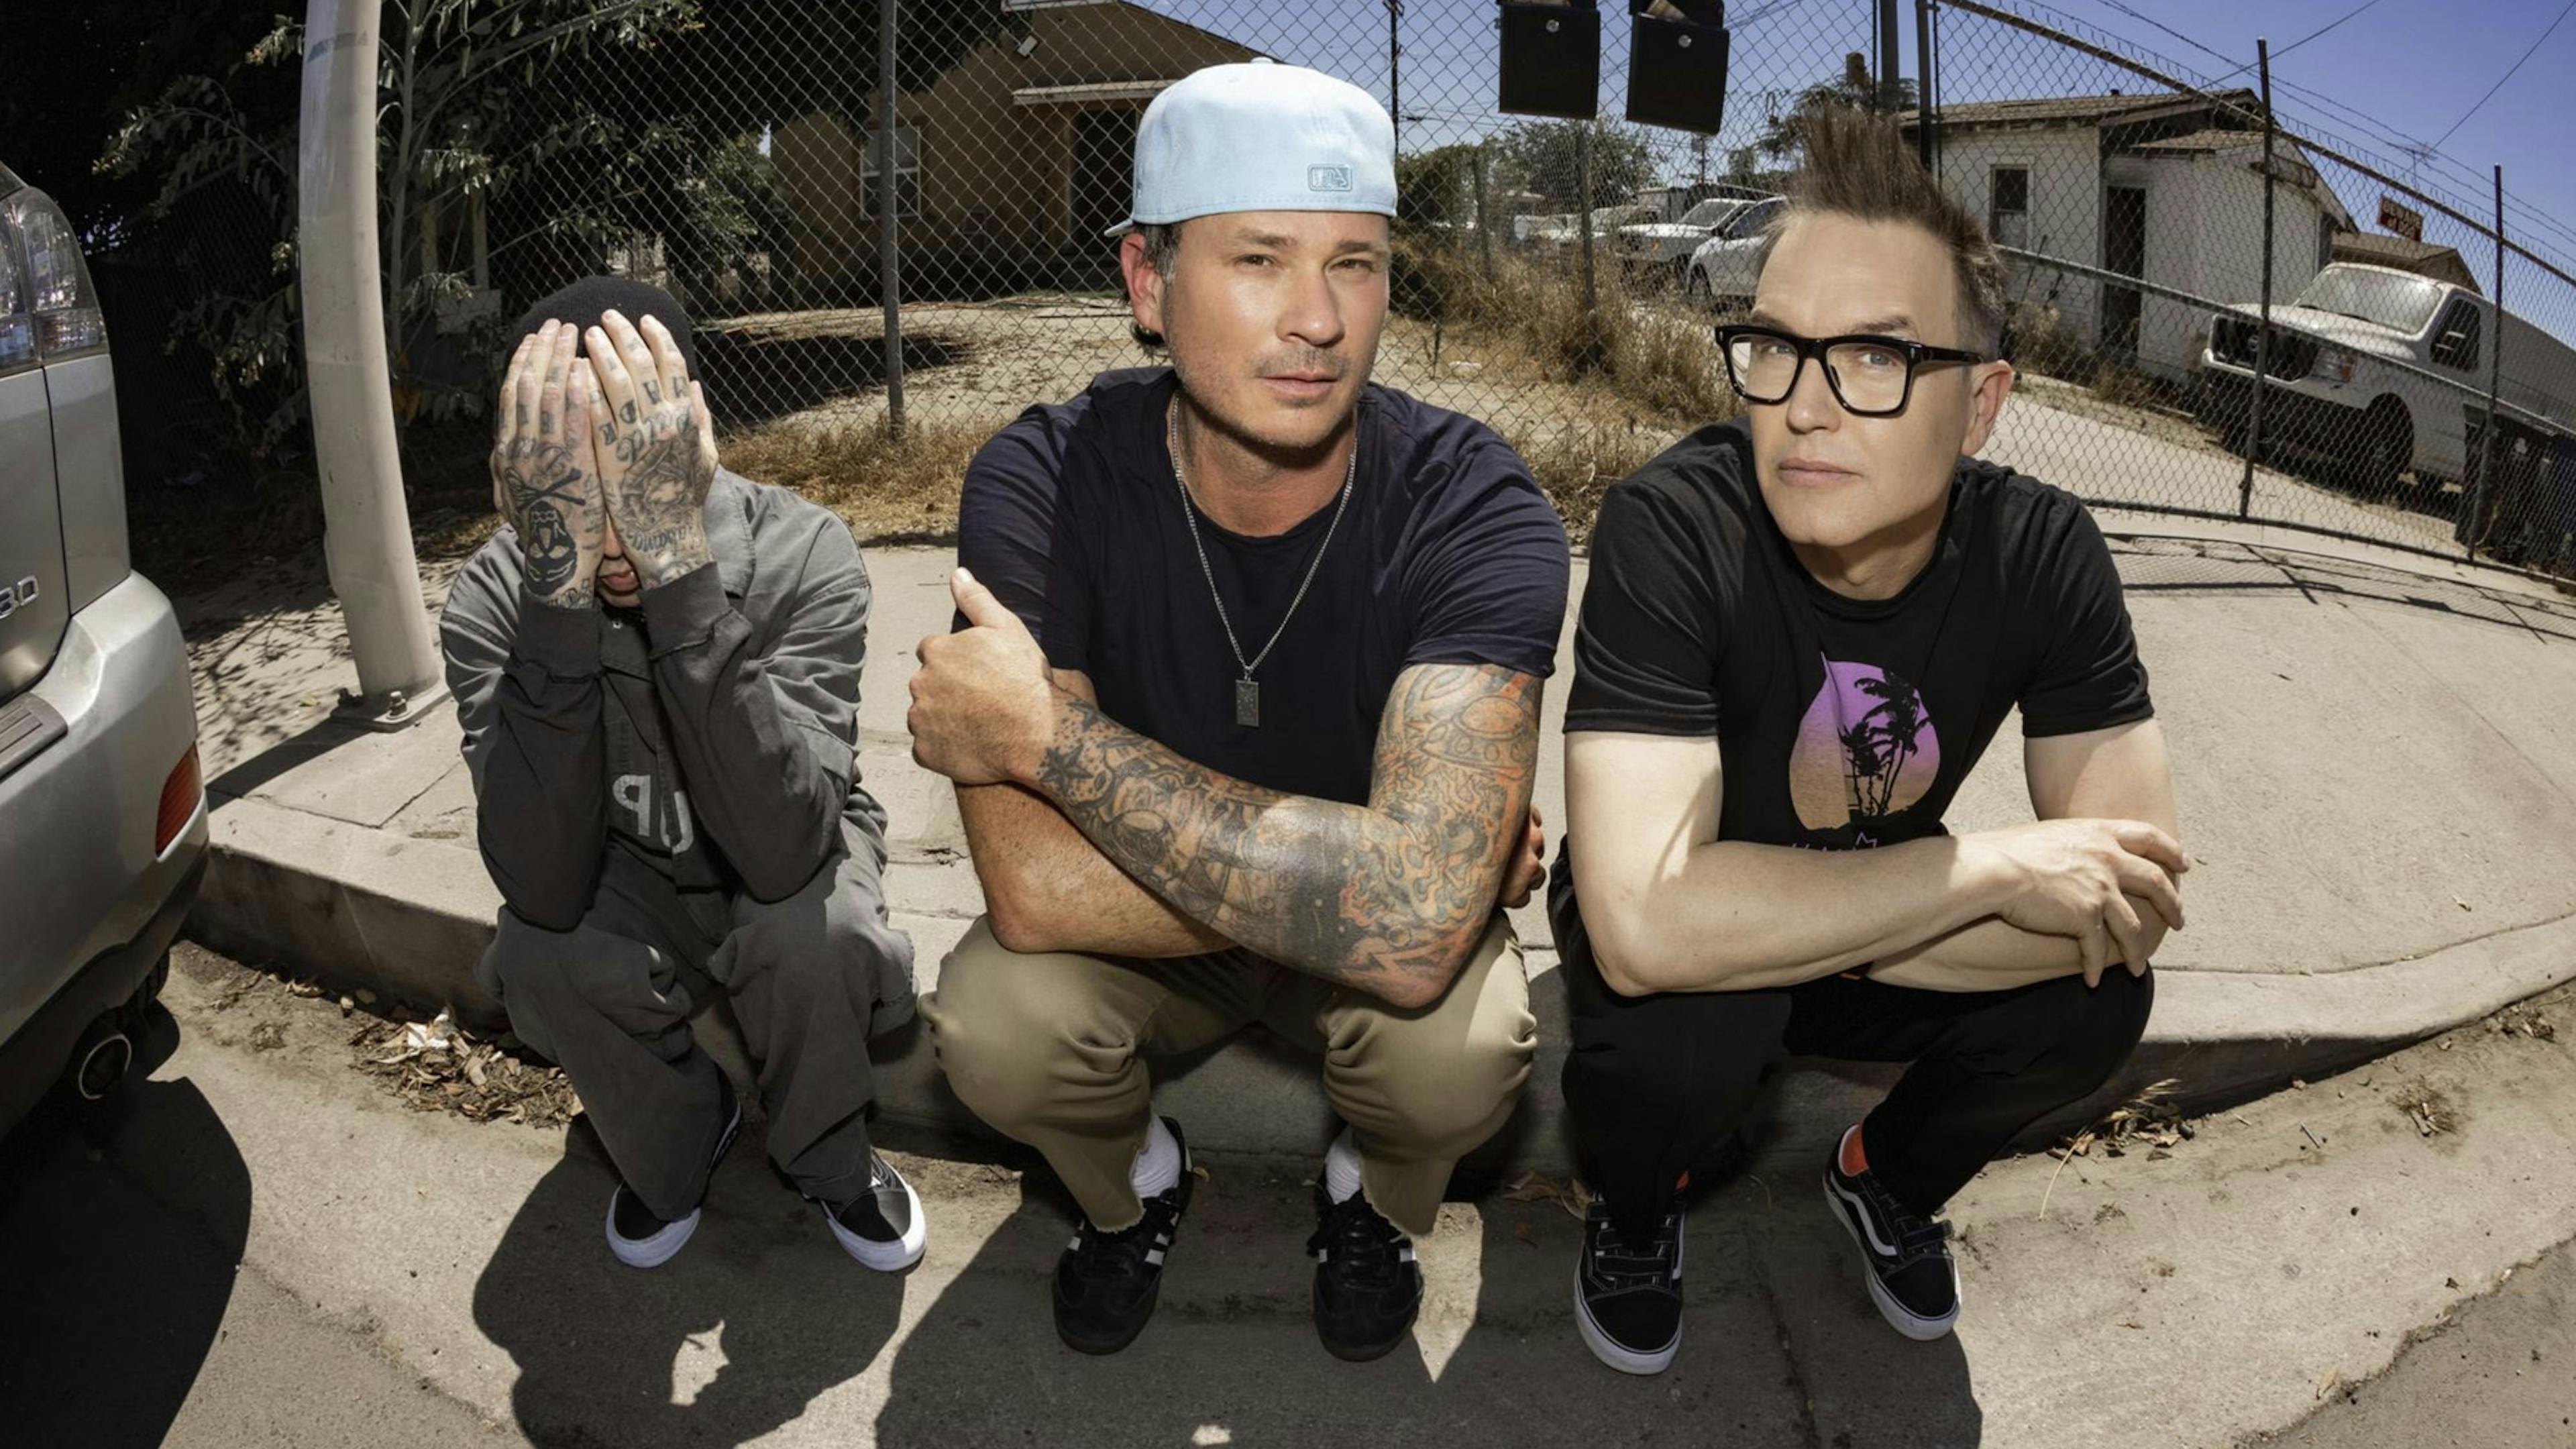 blink-182 confirm North American tour support and ‘brand-new show’